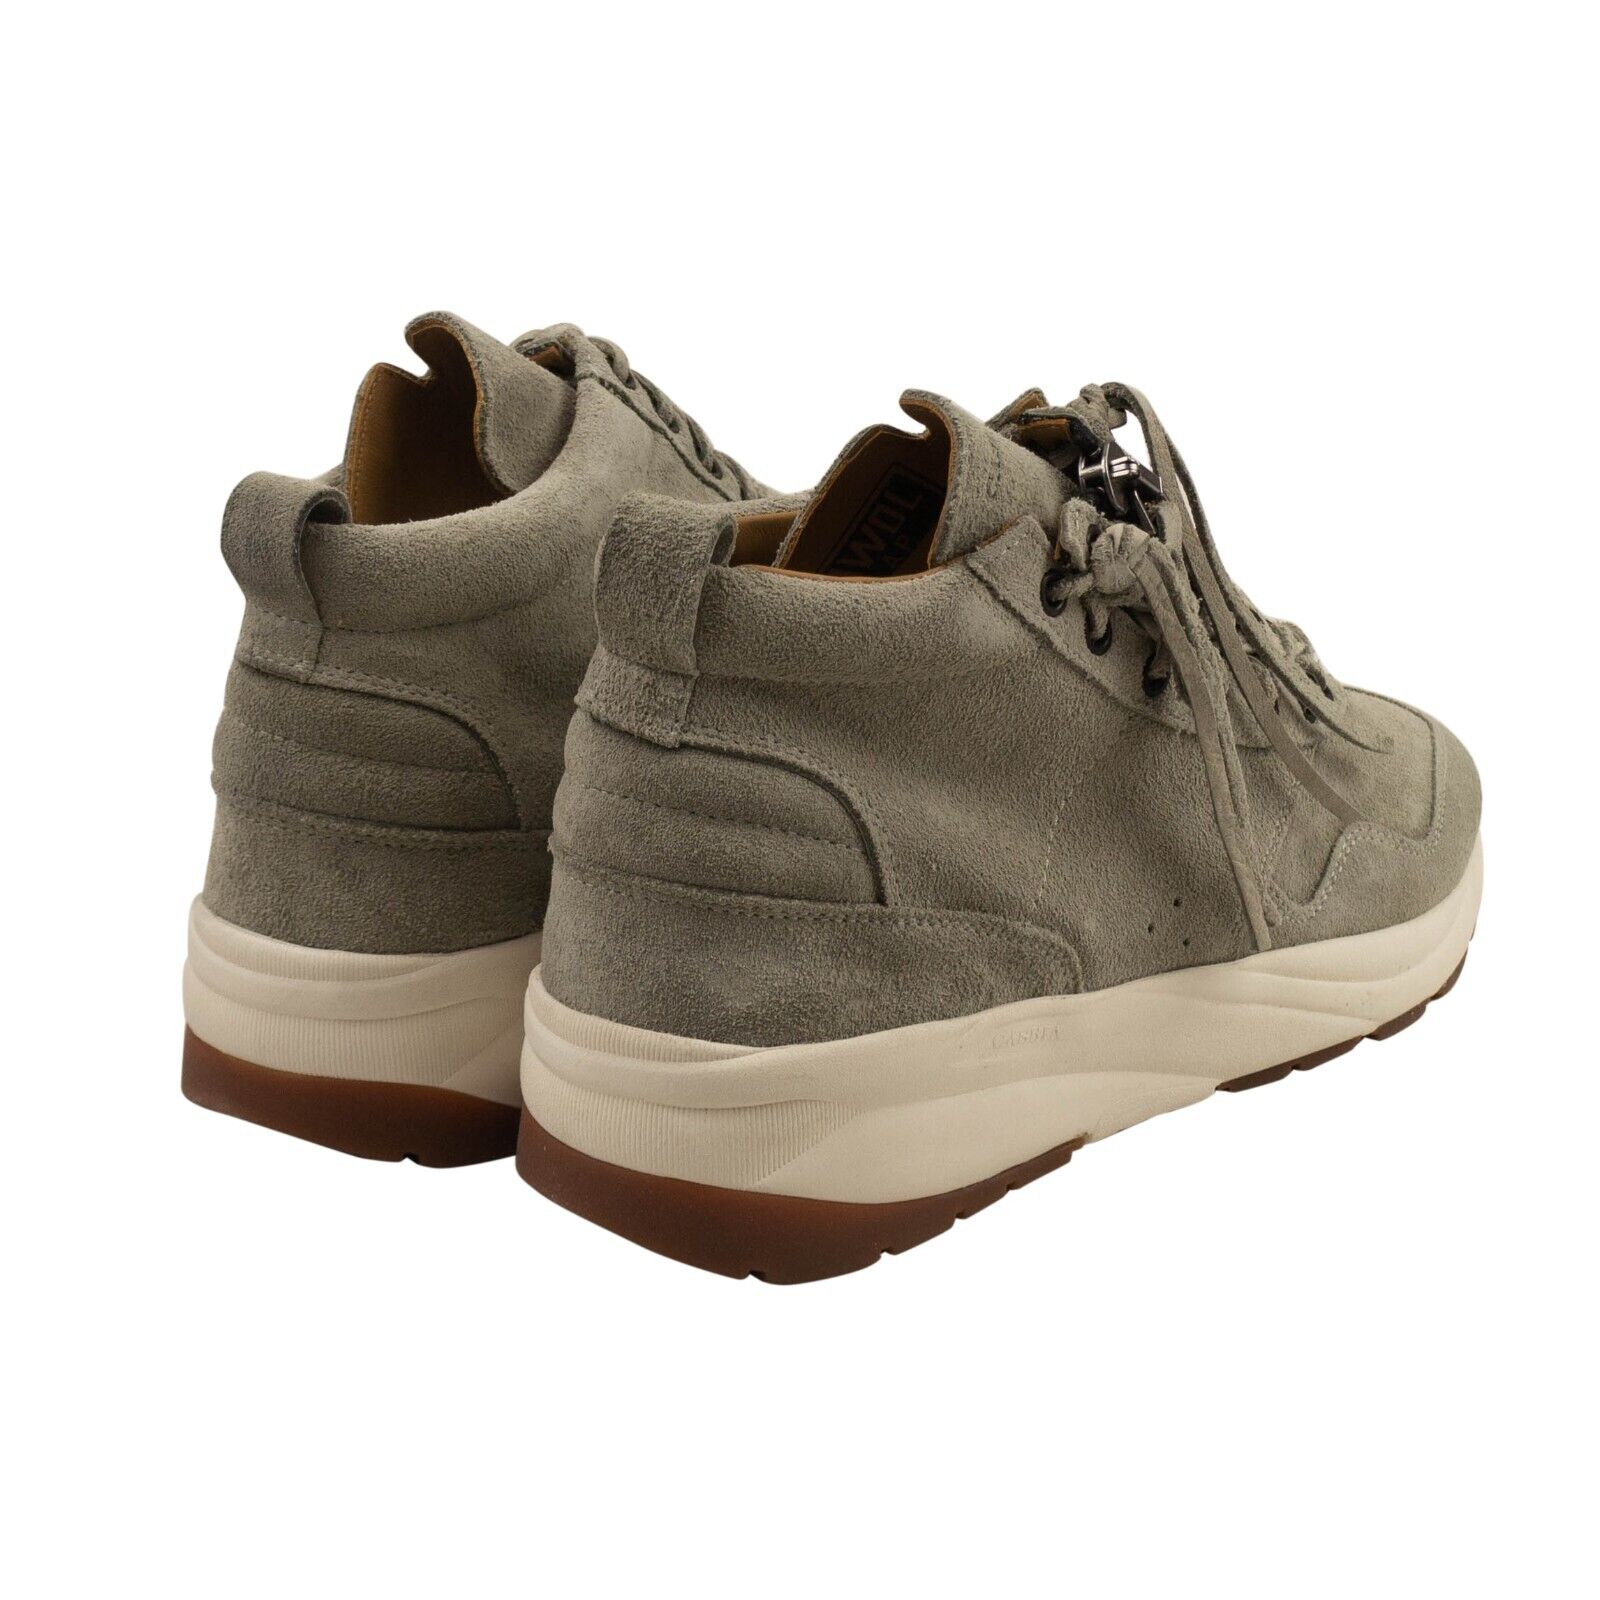 Casbia Awol Ap Sneakers - Sand